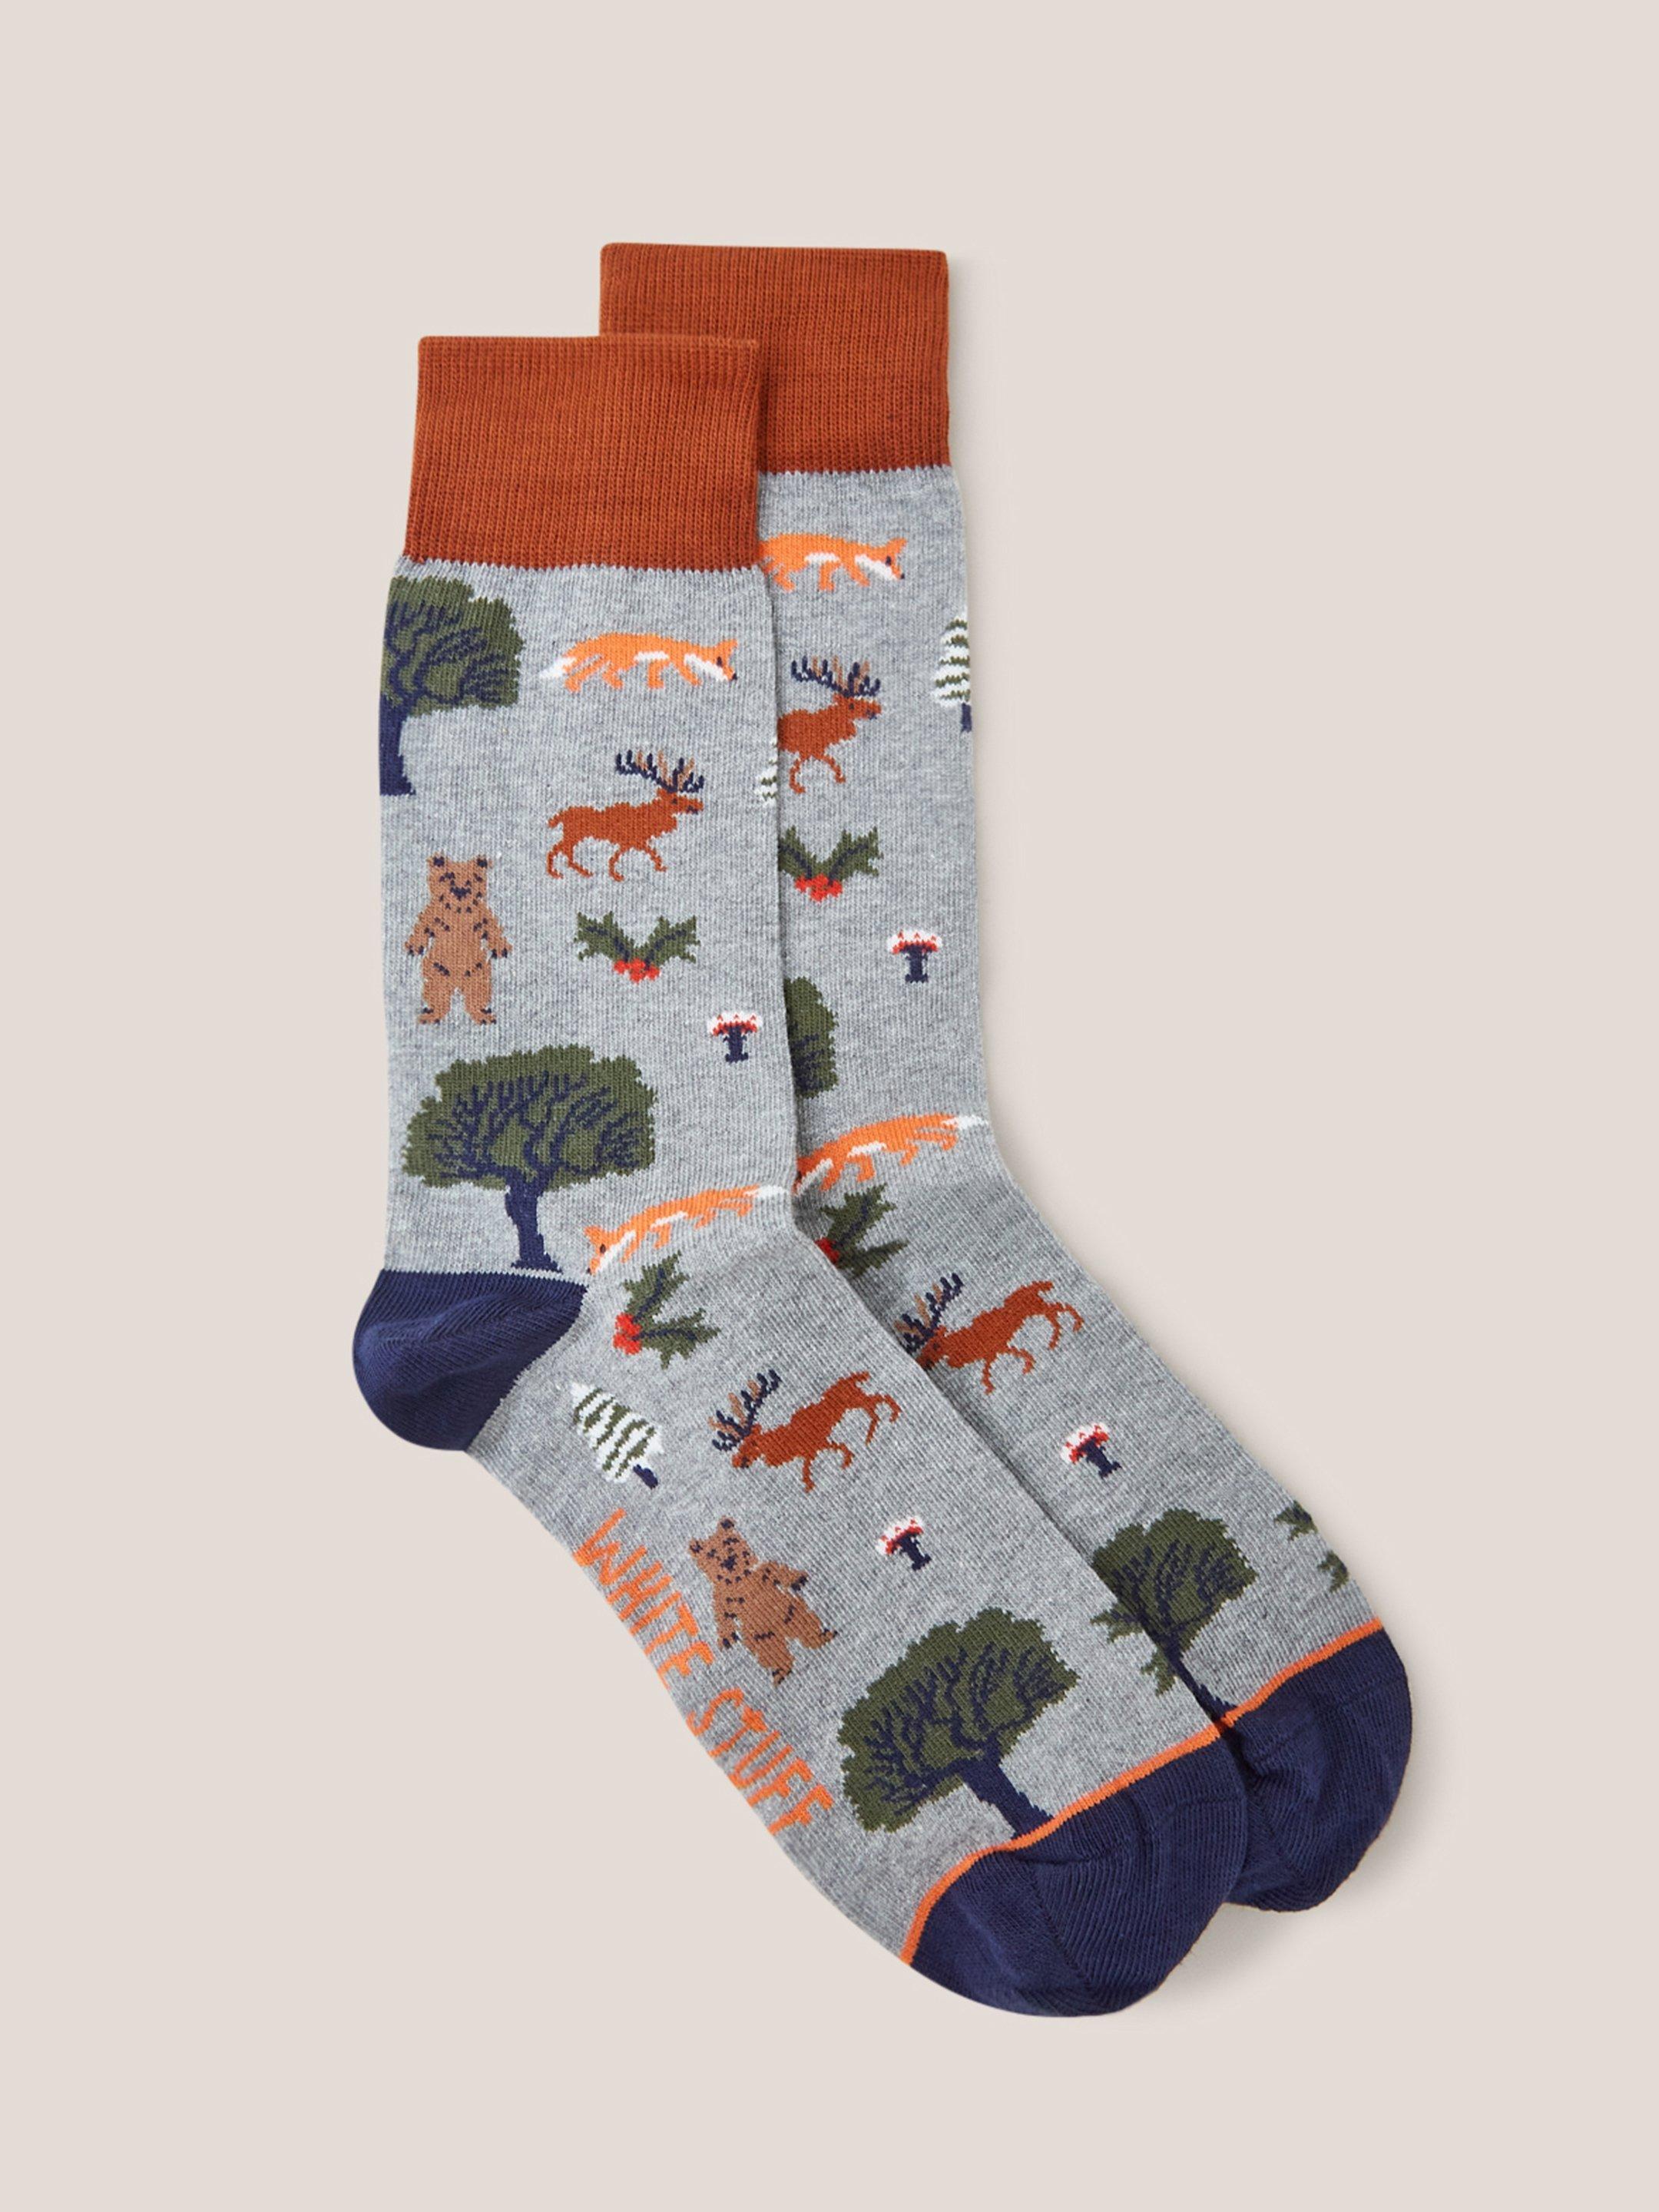 Forest Socks in a Cracker in GREY MLT - FLAT FRONT